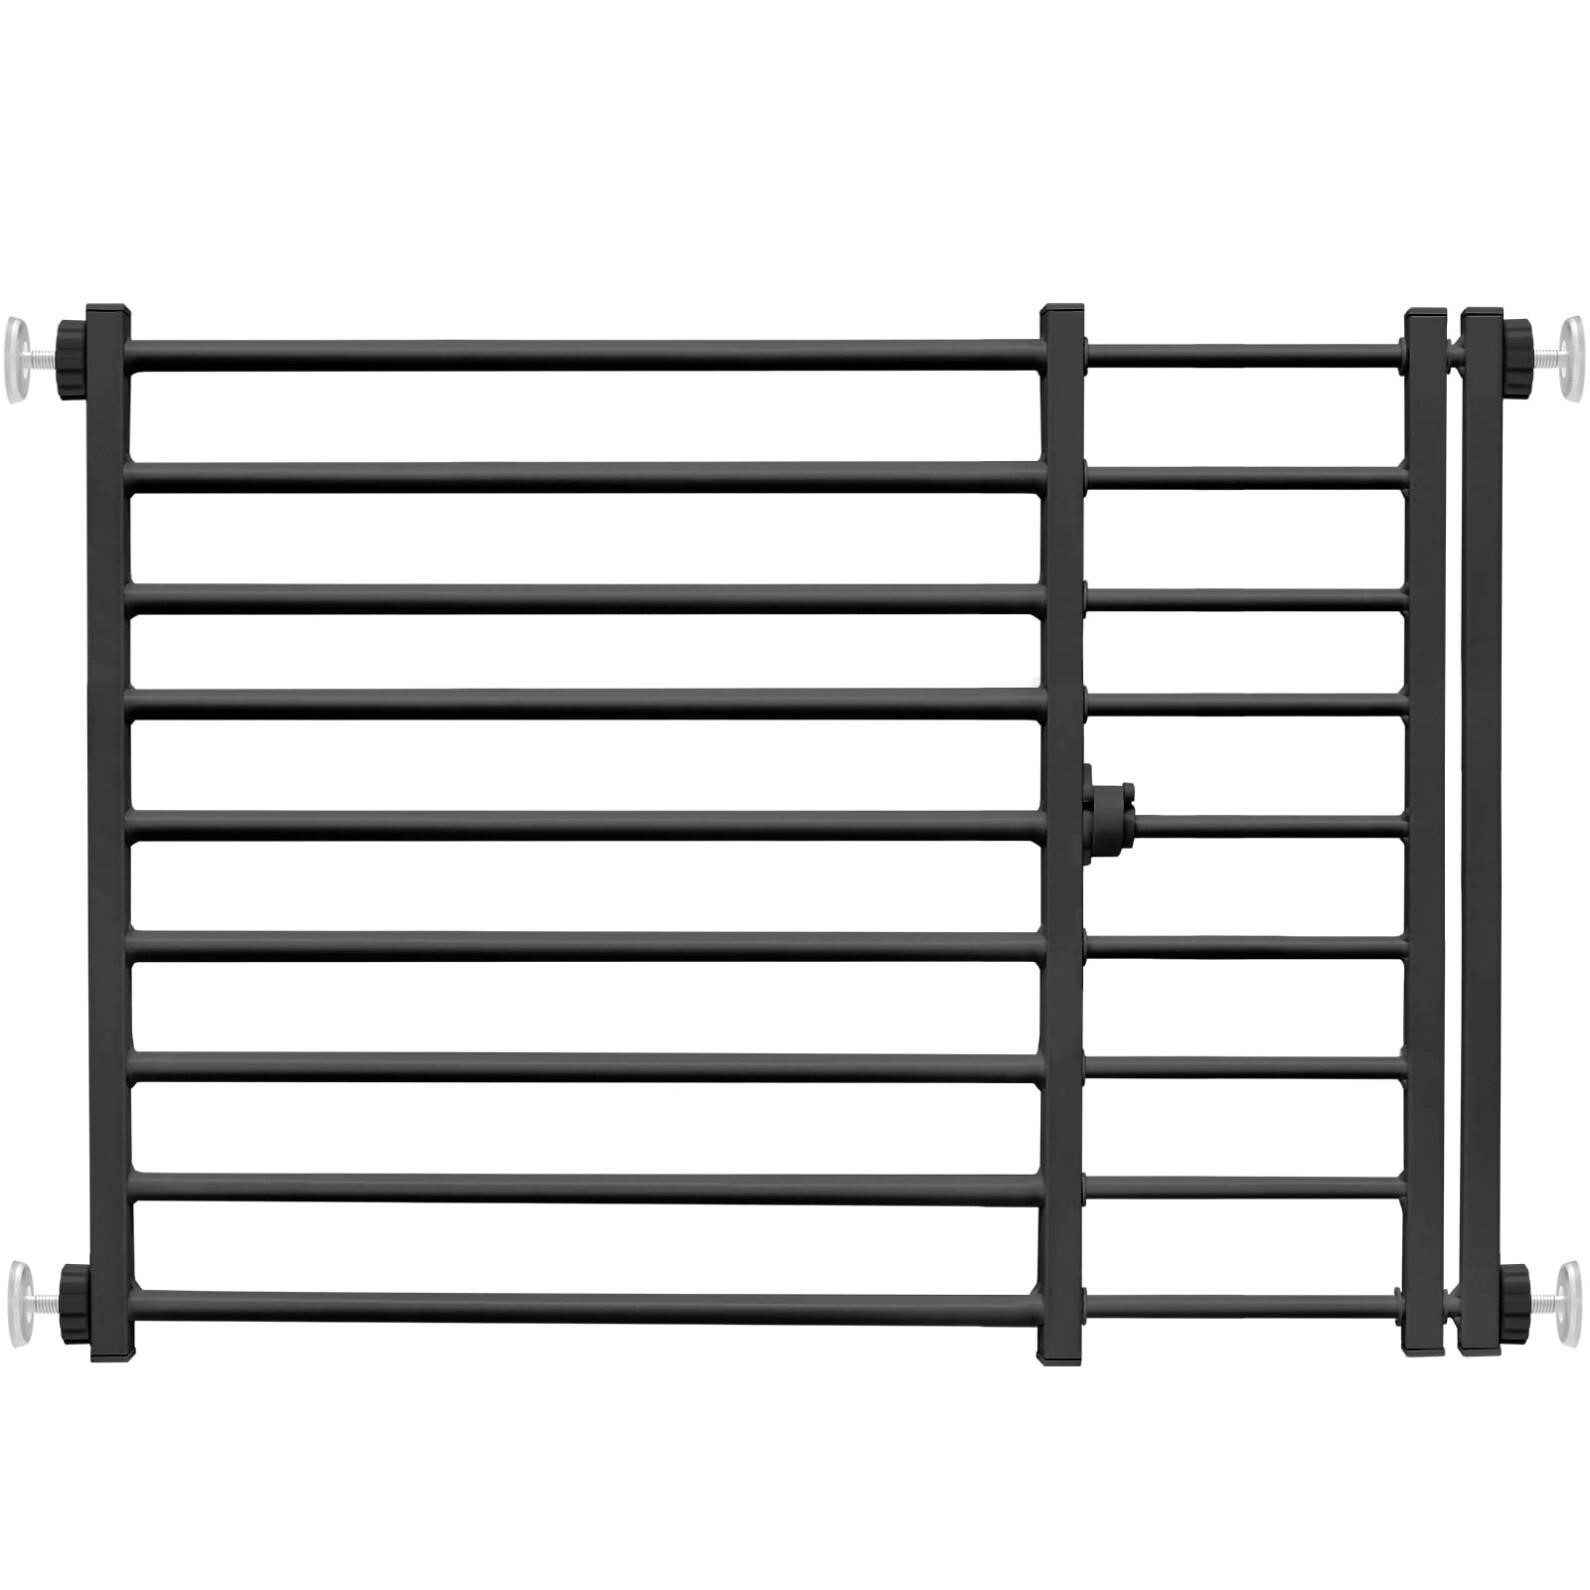 Yoochee Metal Short Dog Gate to Step Over, 25.3’’-